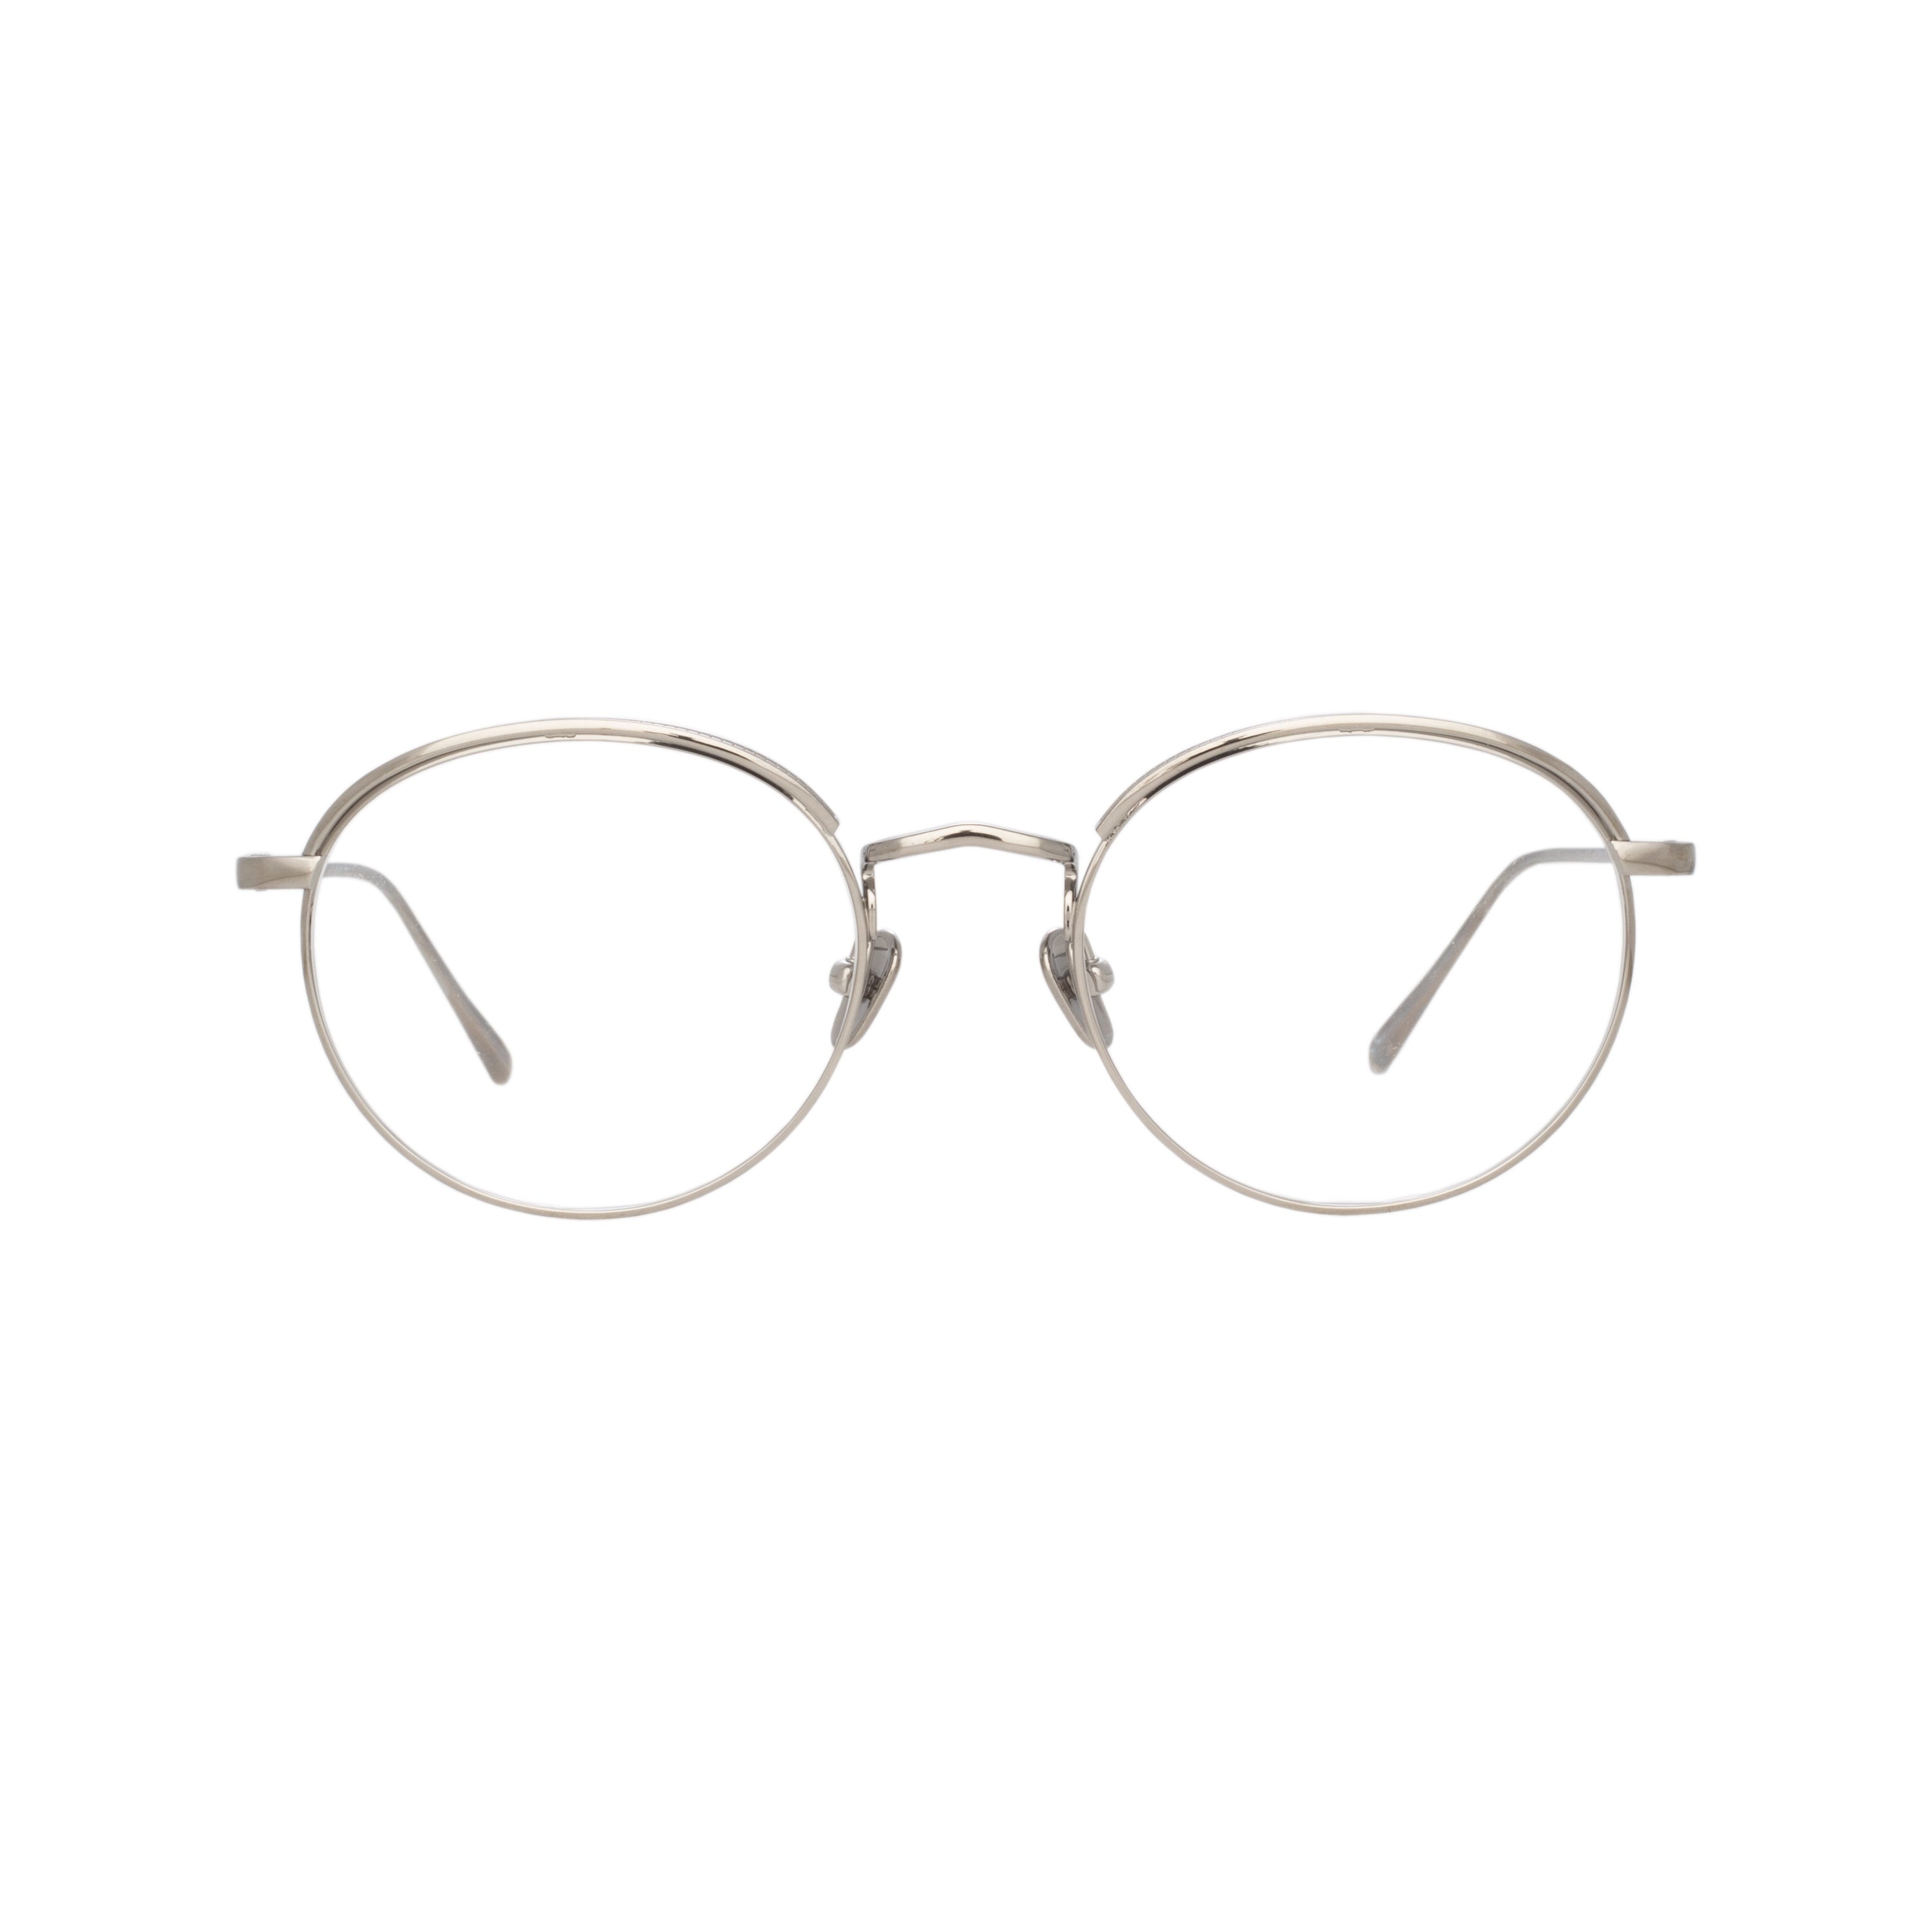 THE MARLON | OVAL OPTICAL FRAME IN WHITE GOLD (C6) - 1